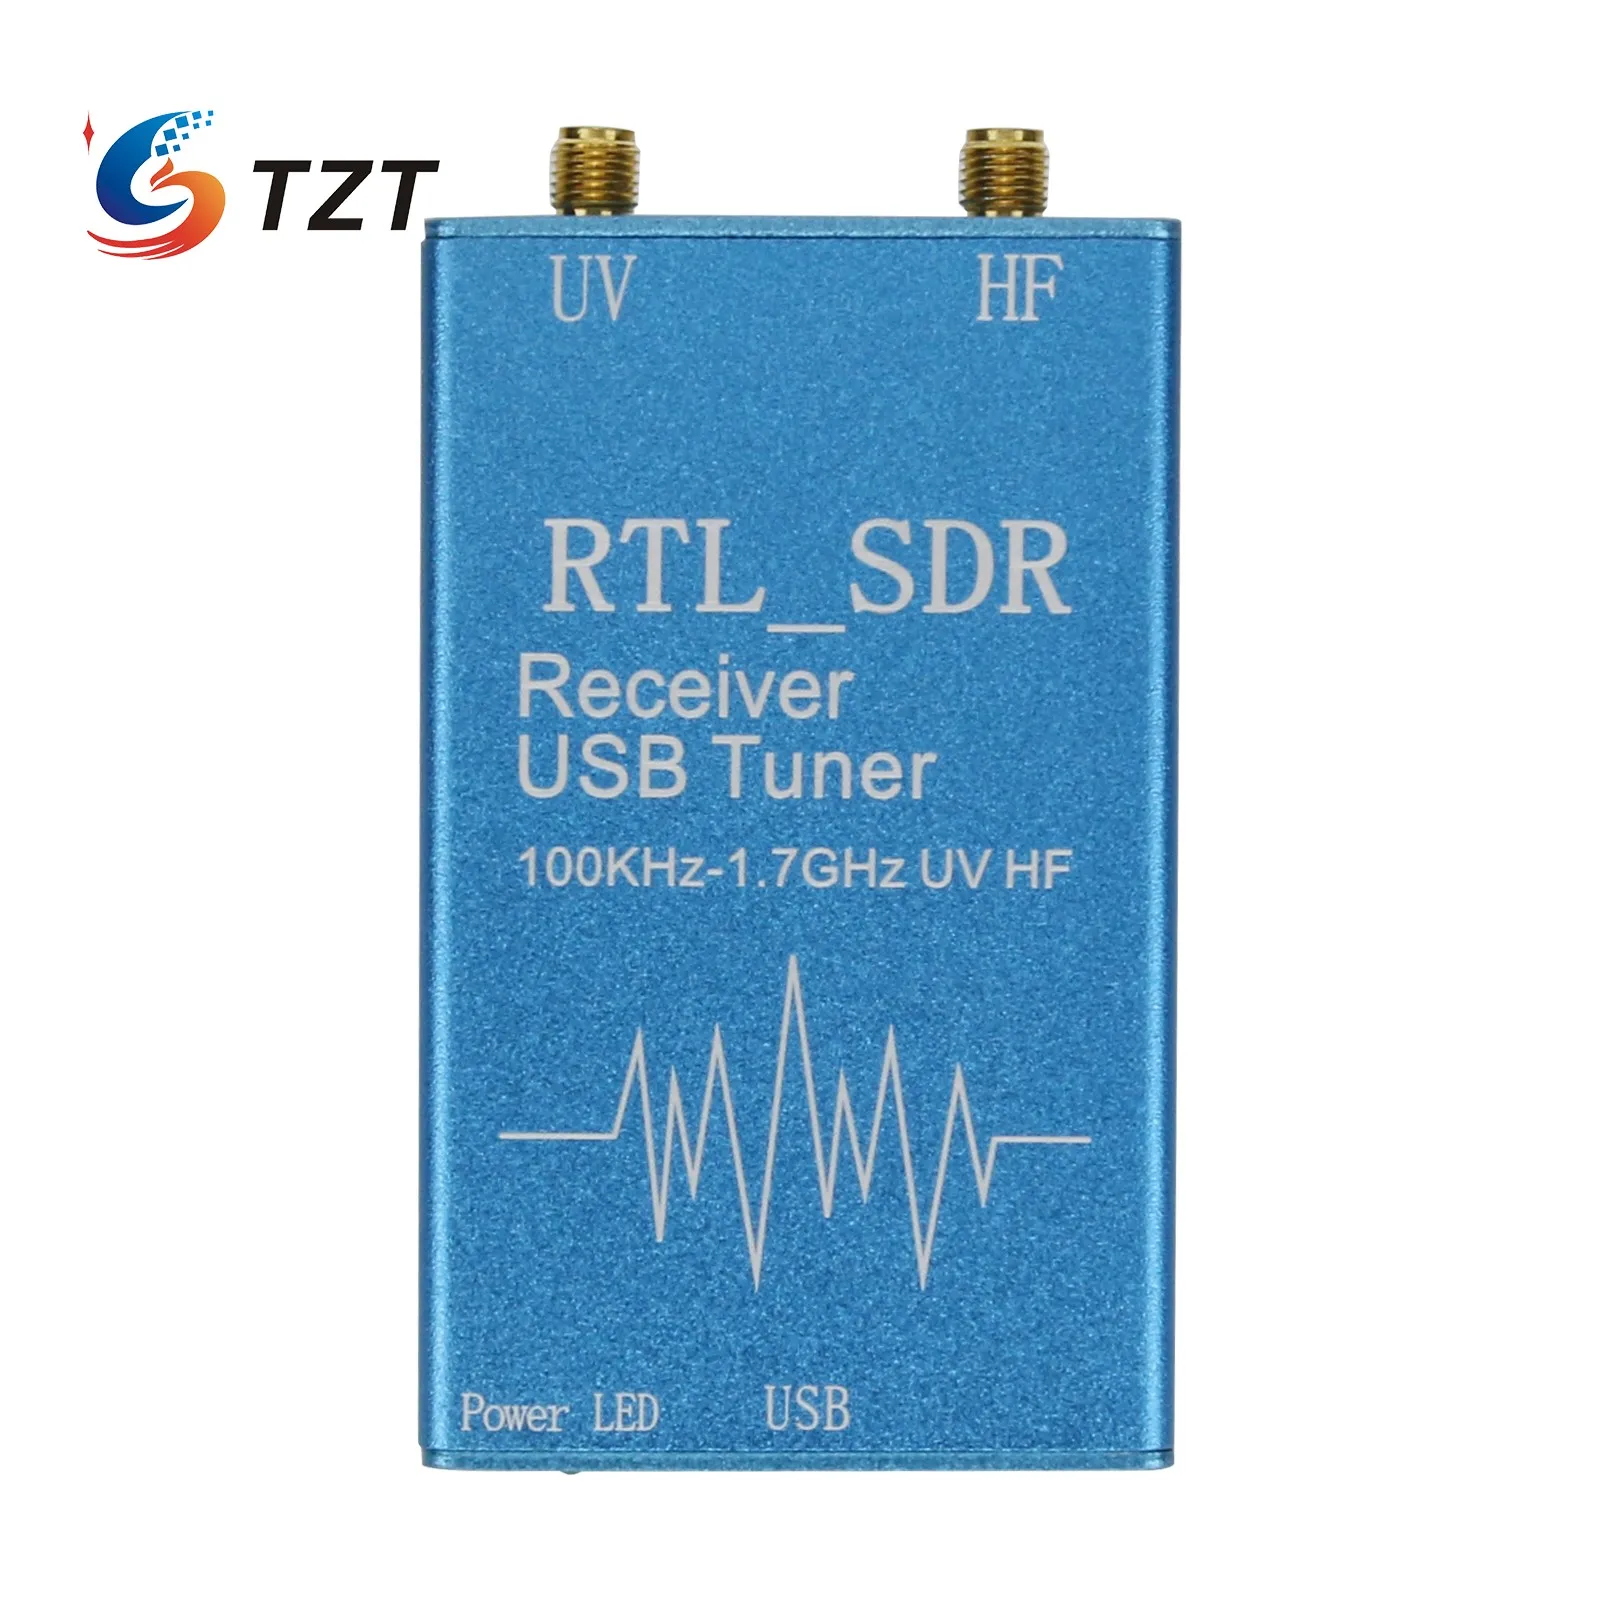 Tzt 820t/820t2 For Rtl Sdr Receiver Usb Tuner 100khz-1.7ghz Uv Hf Rtl2832u + R820t2 For Radio Communications - Voice Recognition/control Modules